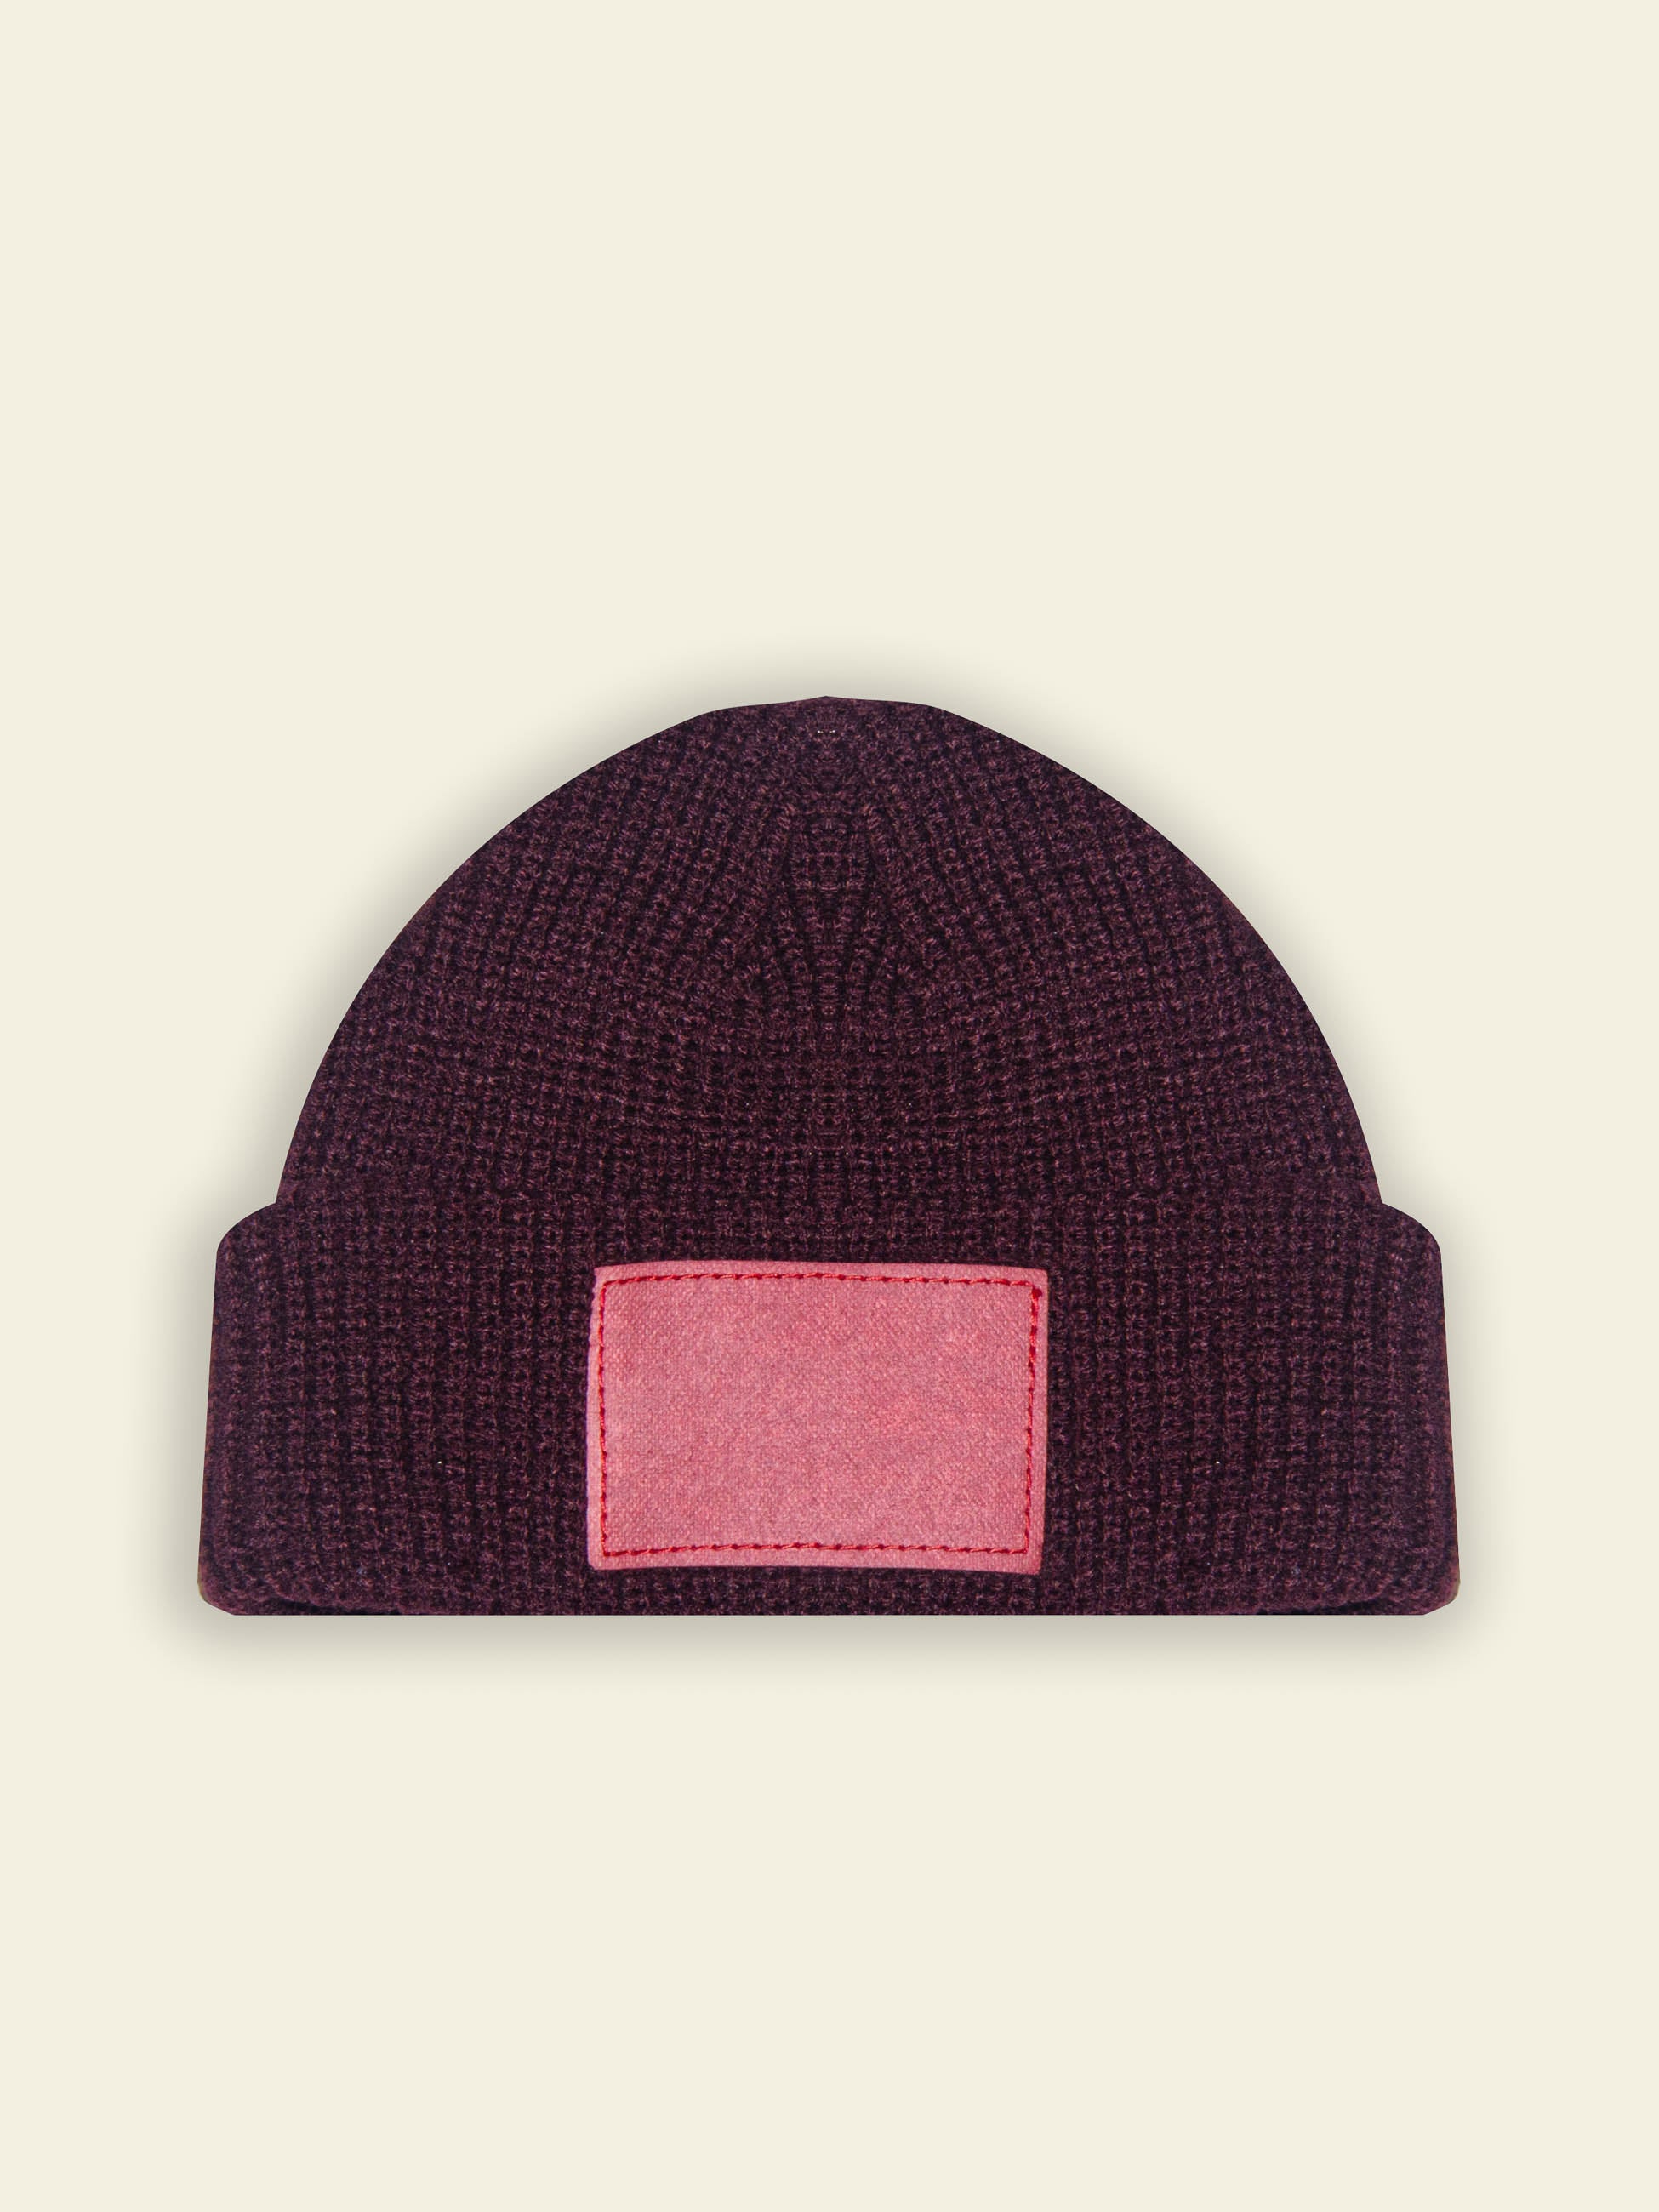 Publik Brand Fisherman Beanie Tea Rose Red, all made in USA, Front